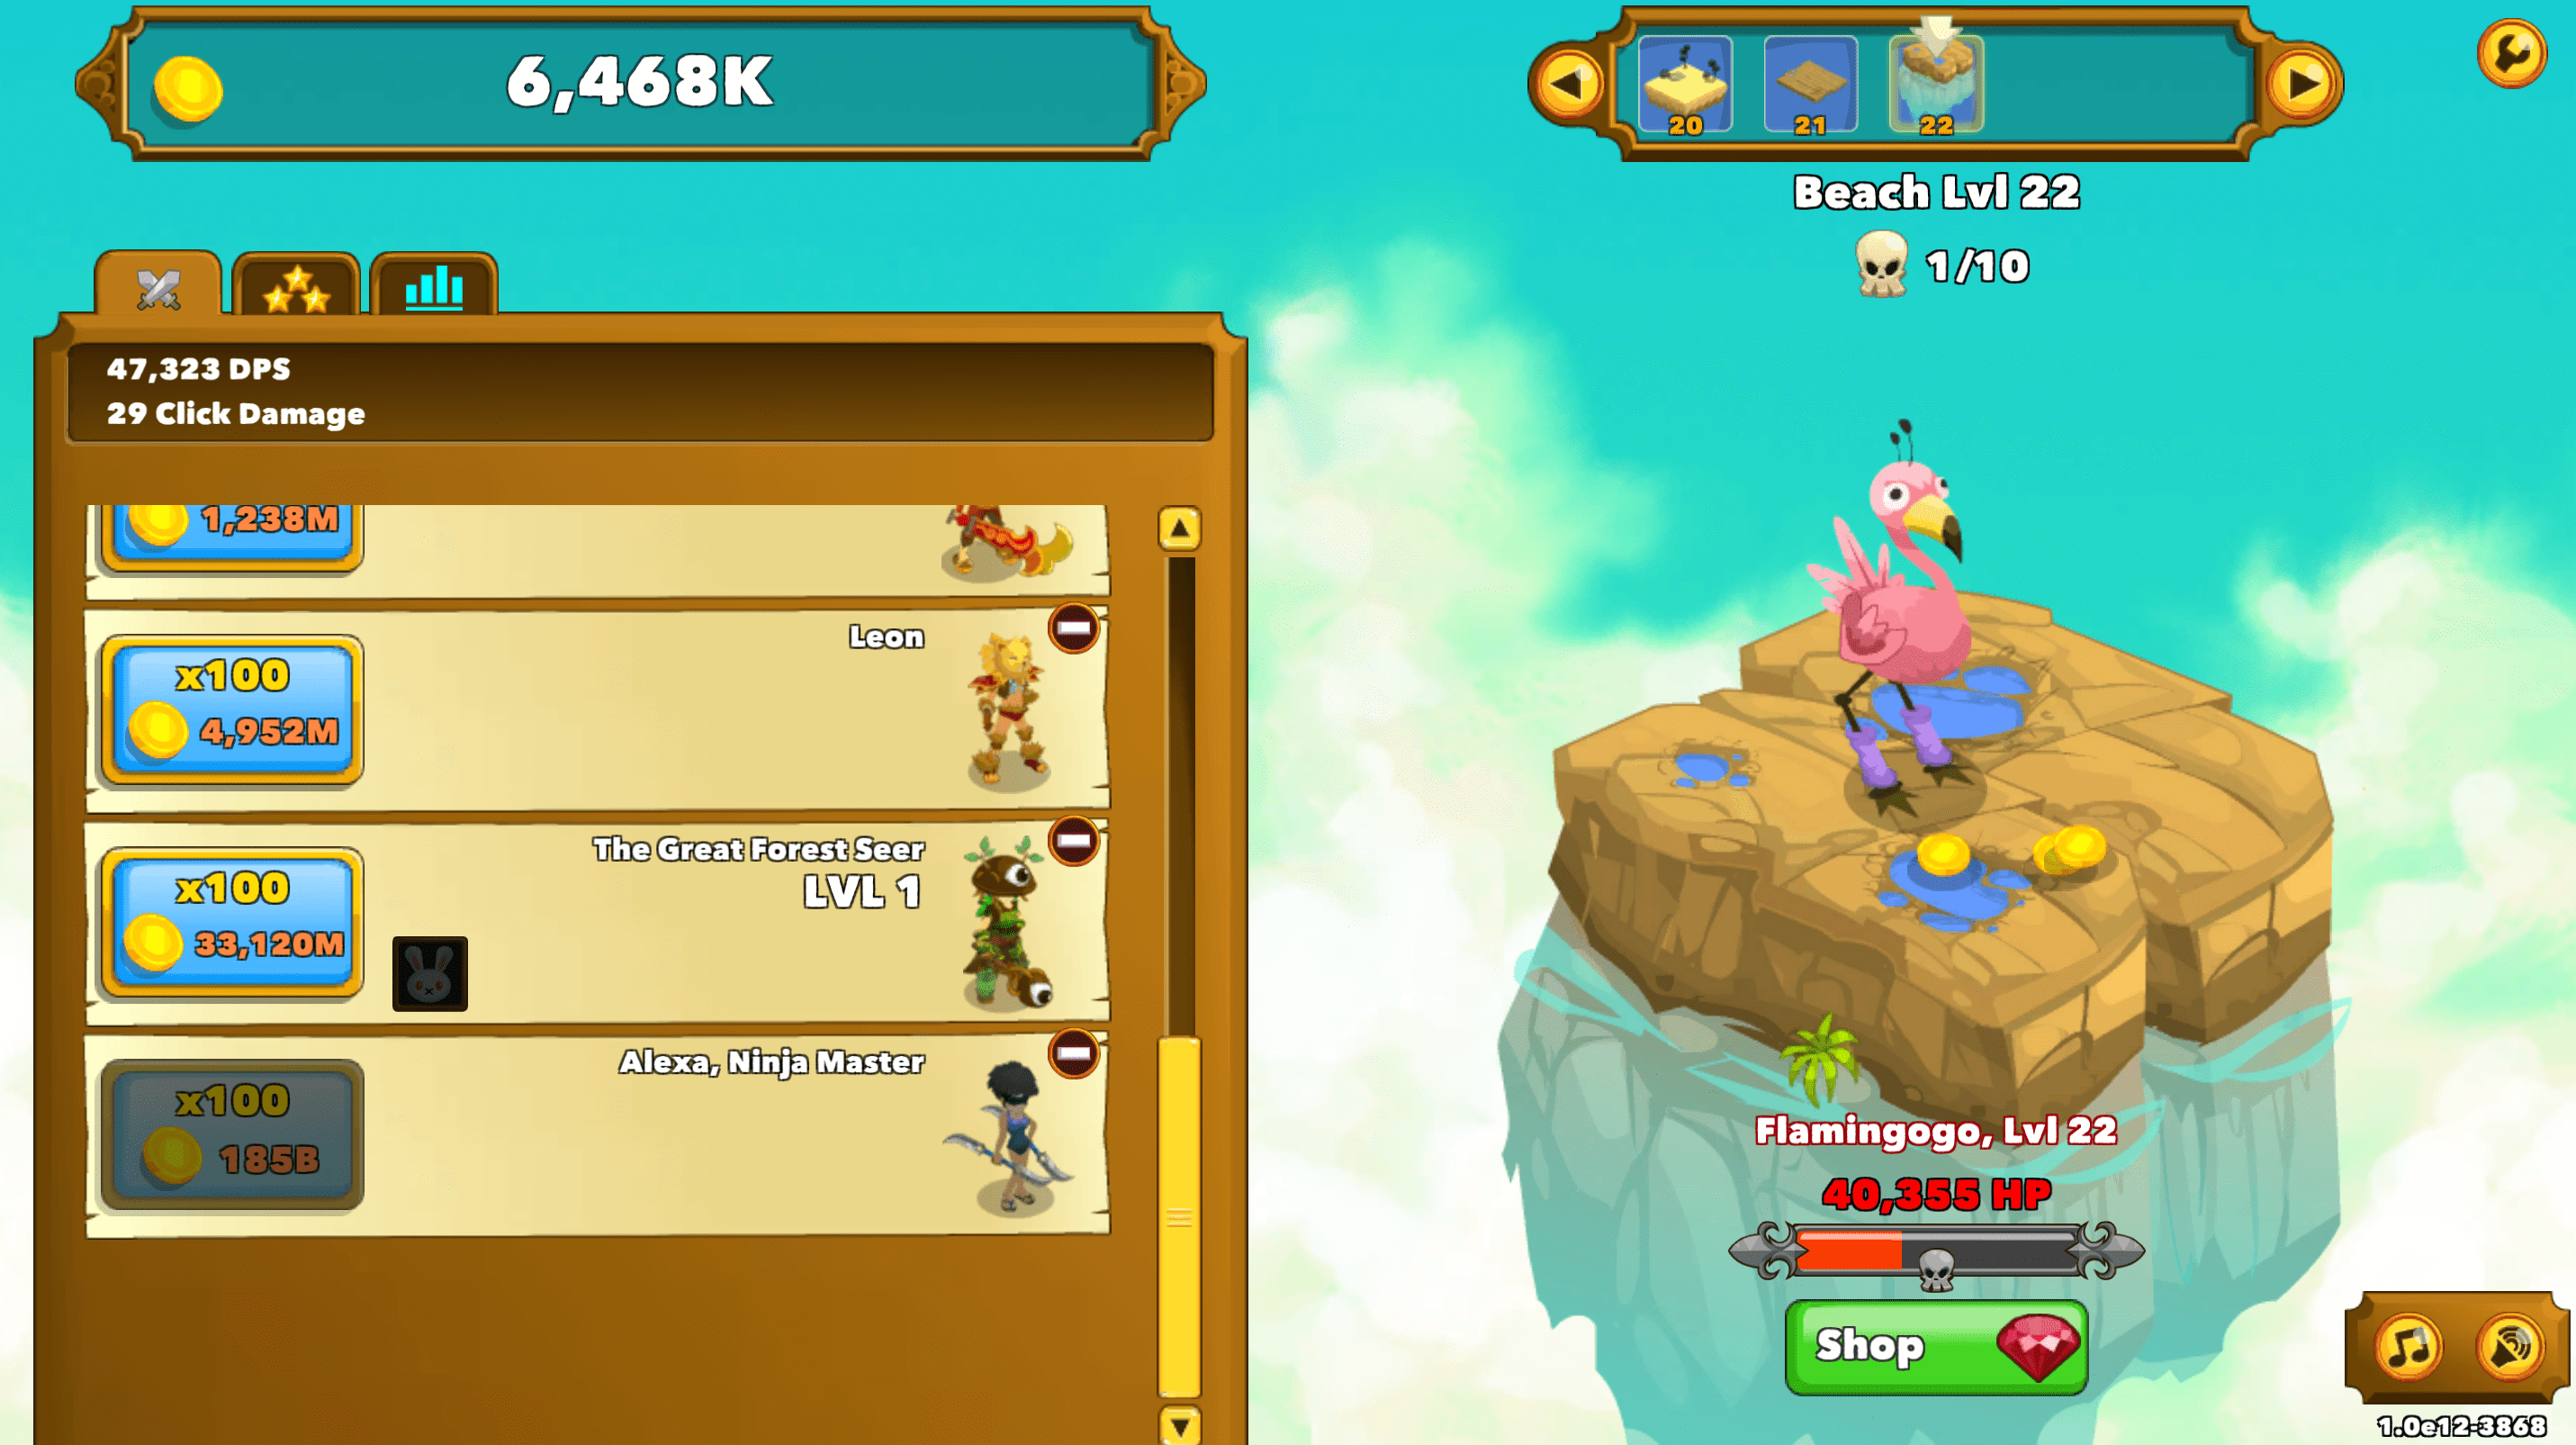 Clicker Heroes - Play it now at Coolmath Games